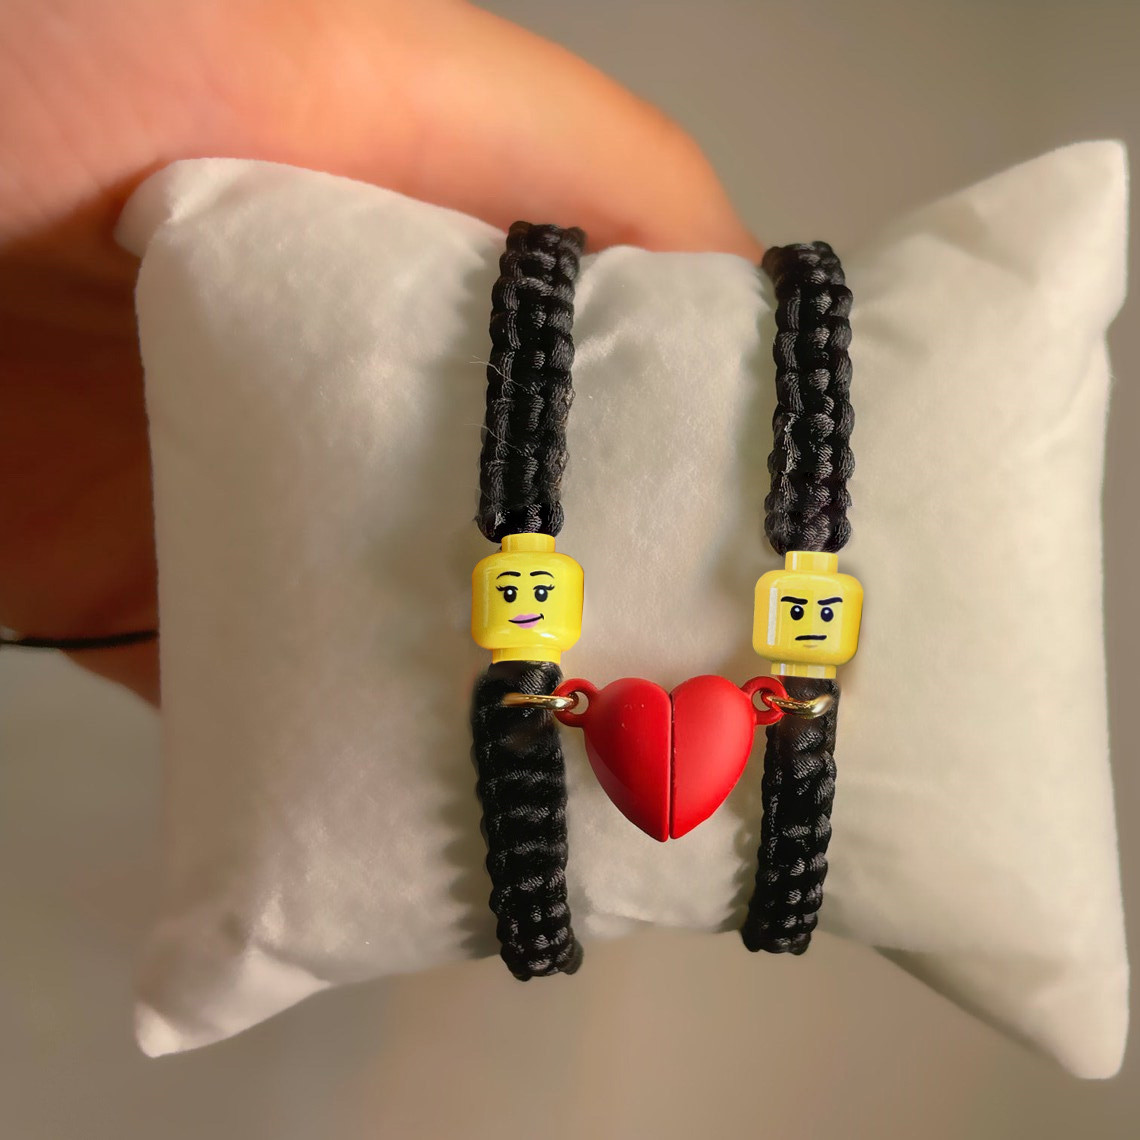 Customized Minifigure Bracelet: A Personalized Gift for Your Special Someone